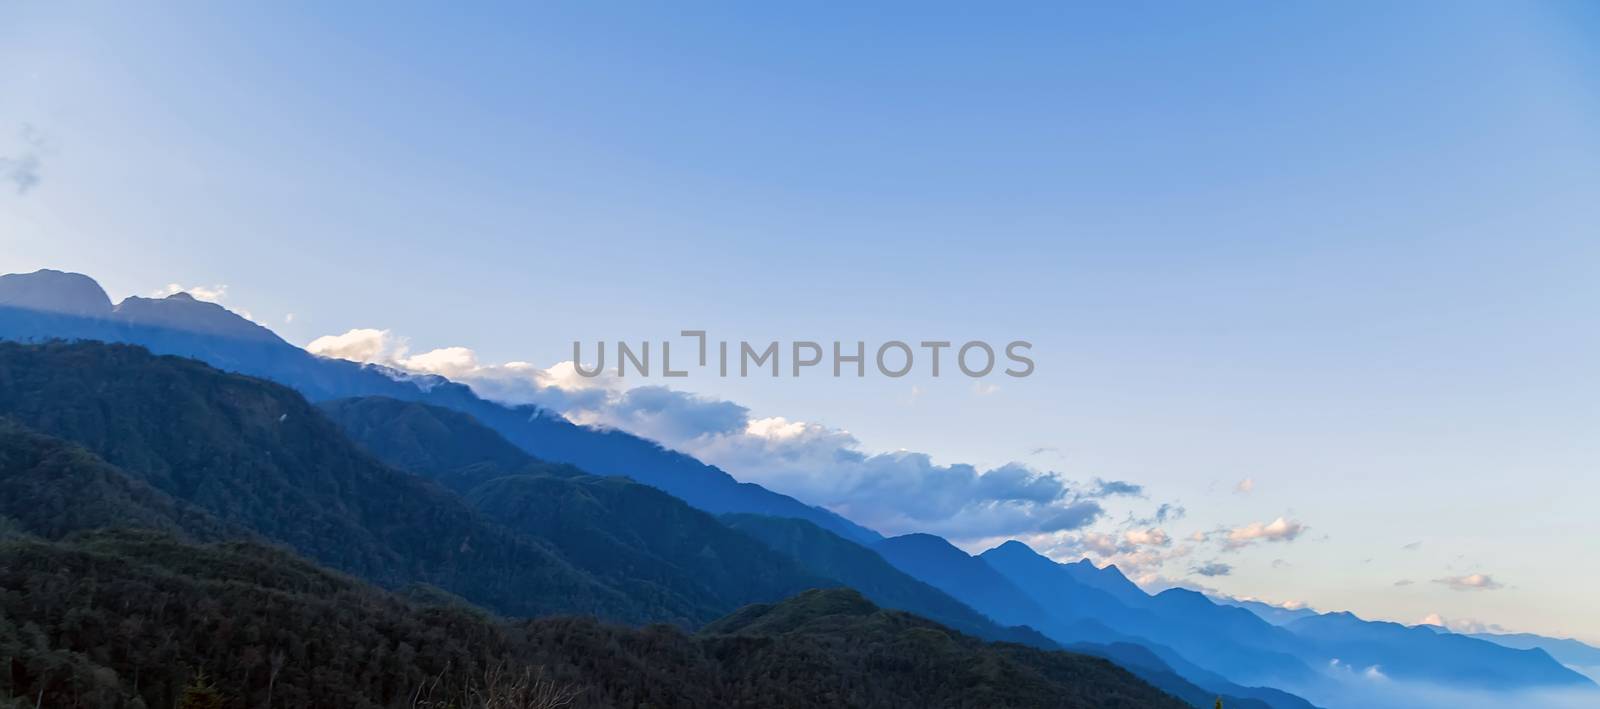 Mountains, mountain peak hill top nature landscape. Camping landscape and hiking travel adventure tourism. Amazing Sunrise over the mountain range.